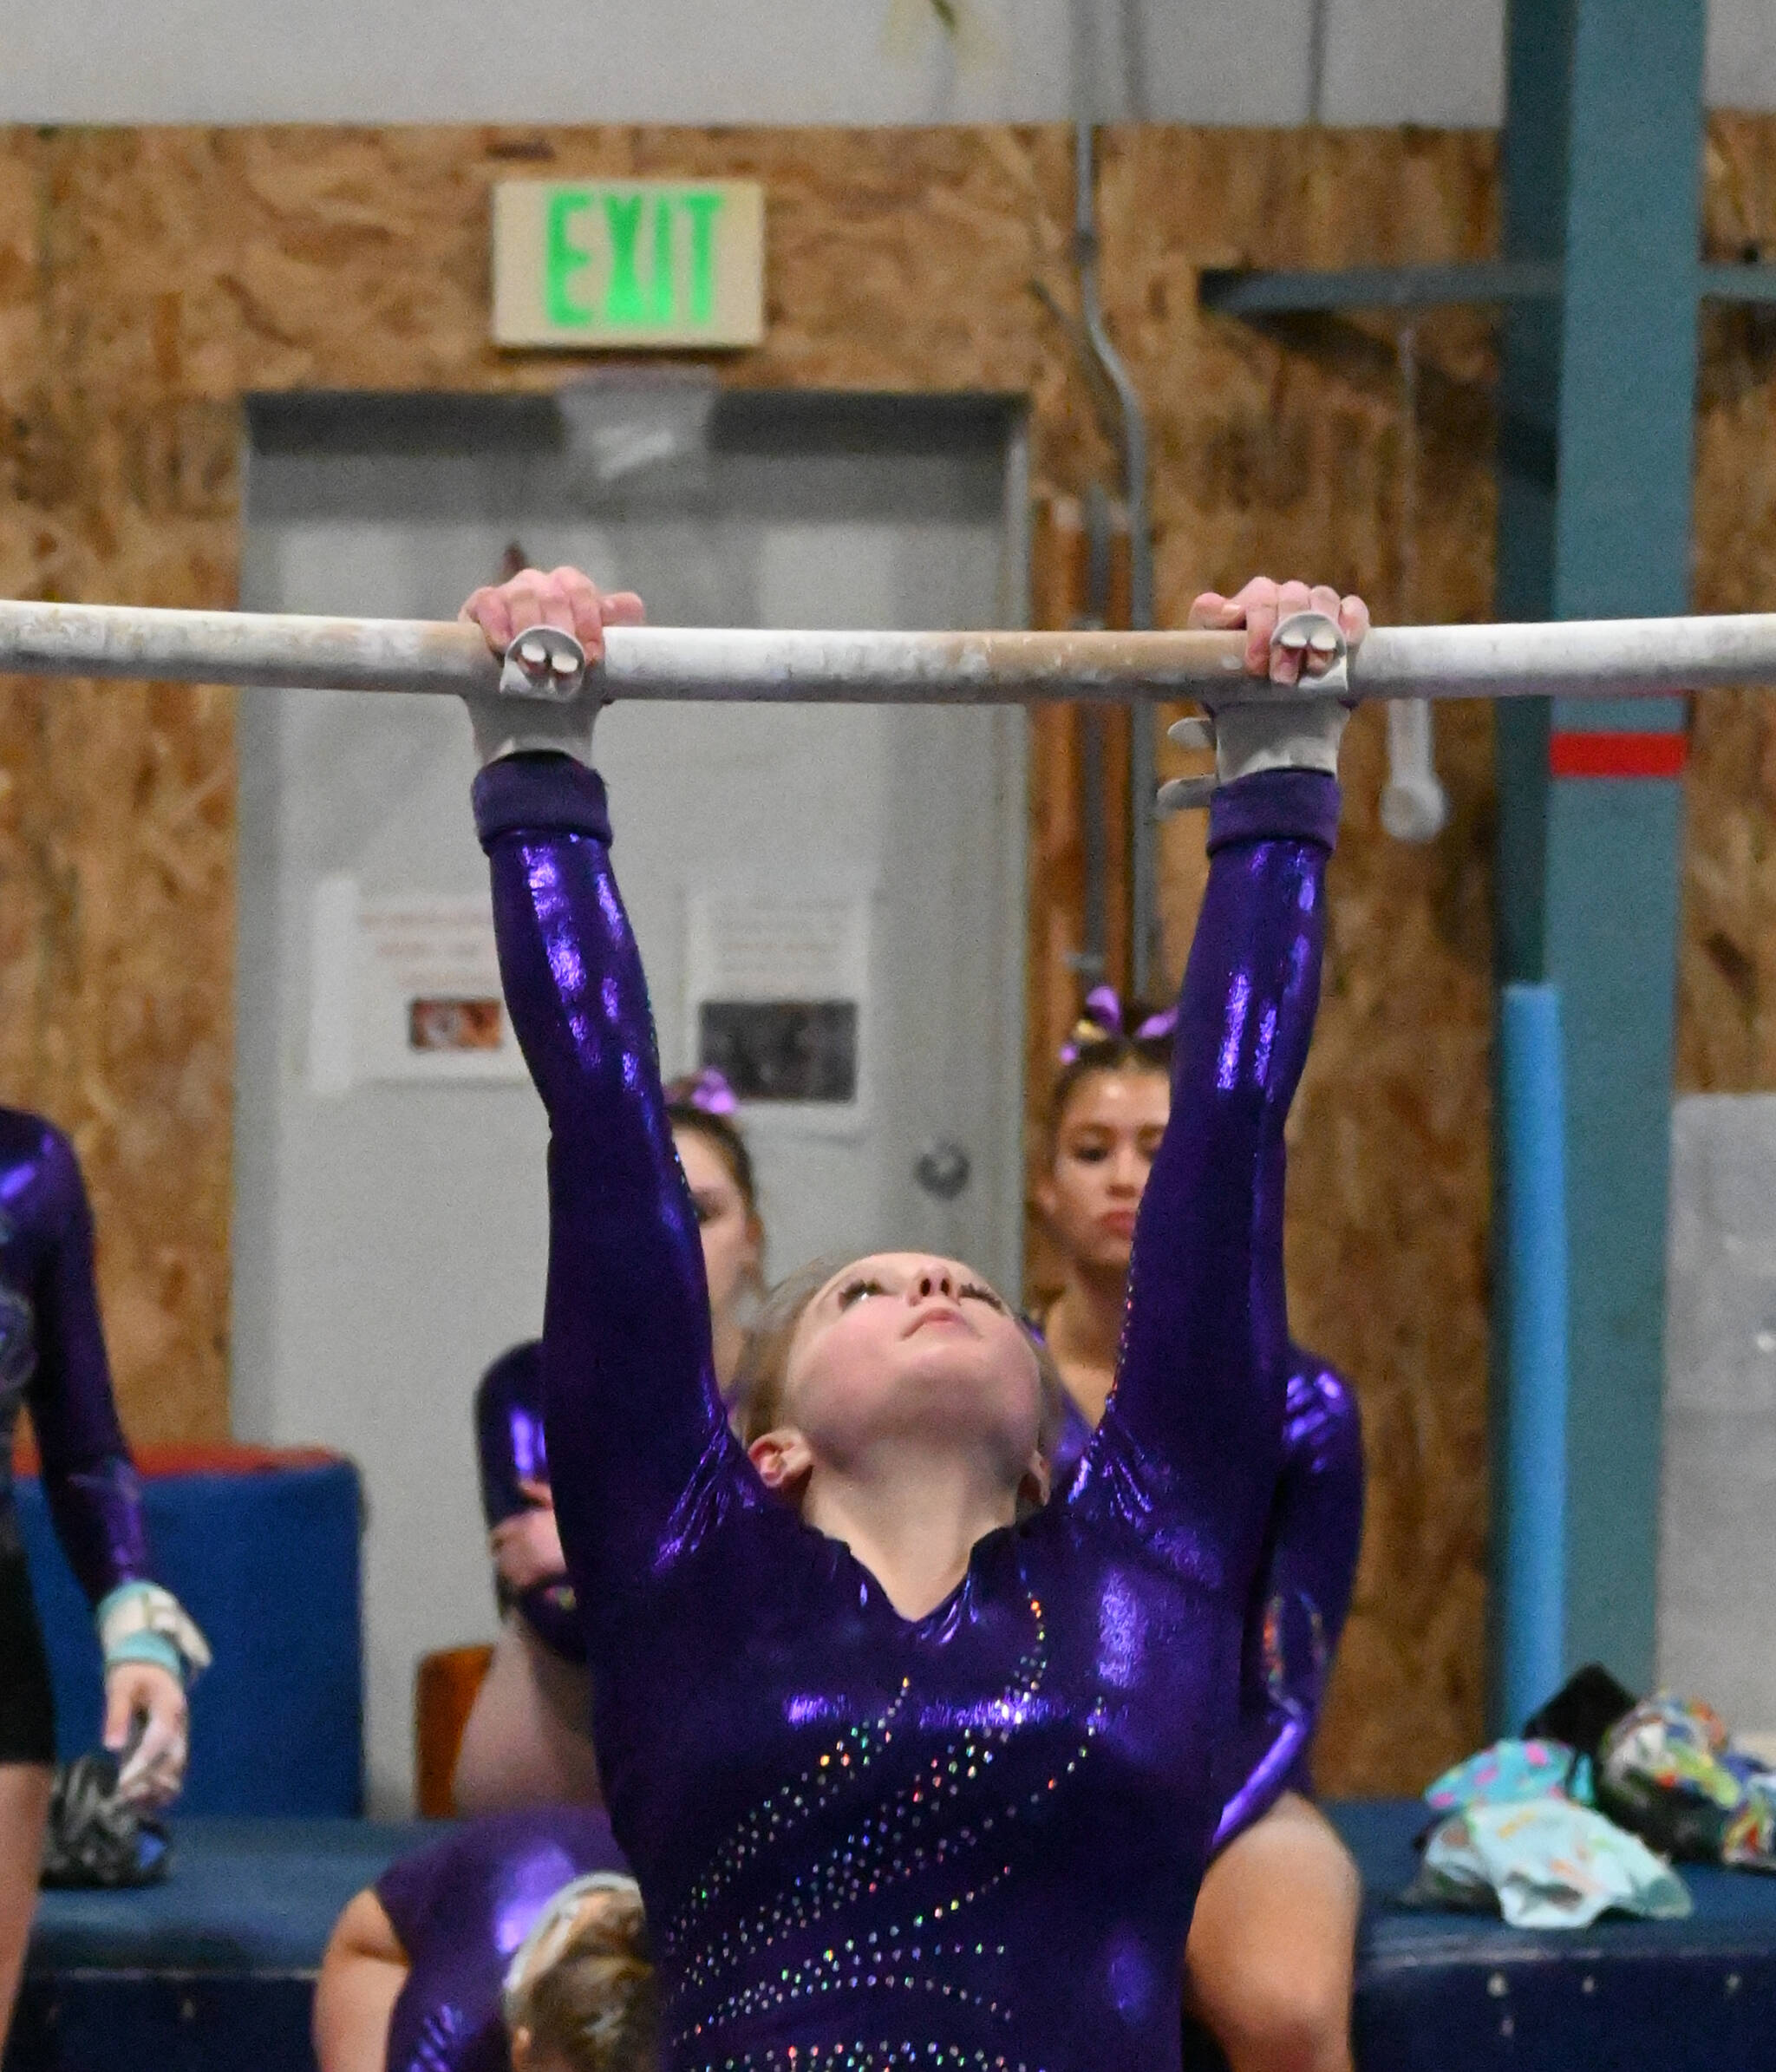 Sequim Gazette photo by Michael Dashiell / Sequim’s Lucy Spelker competes in the bars portion of a league meet against Bainbridge on Jan. 11 in Port Angeles. She placed sixth with 5.9 points.